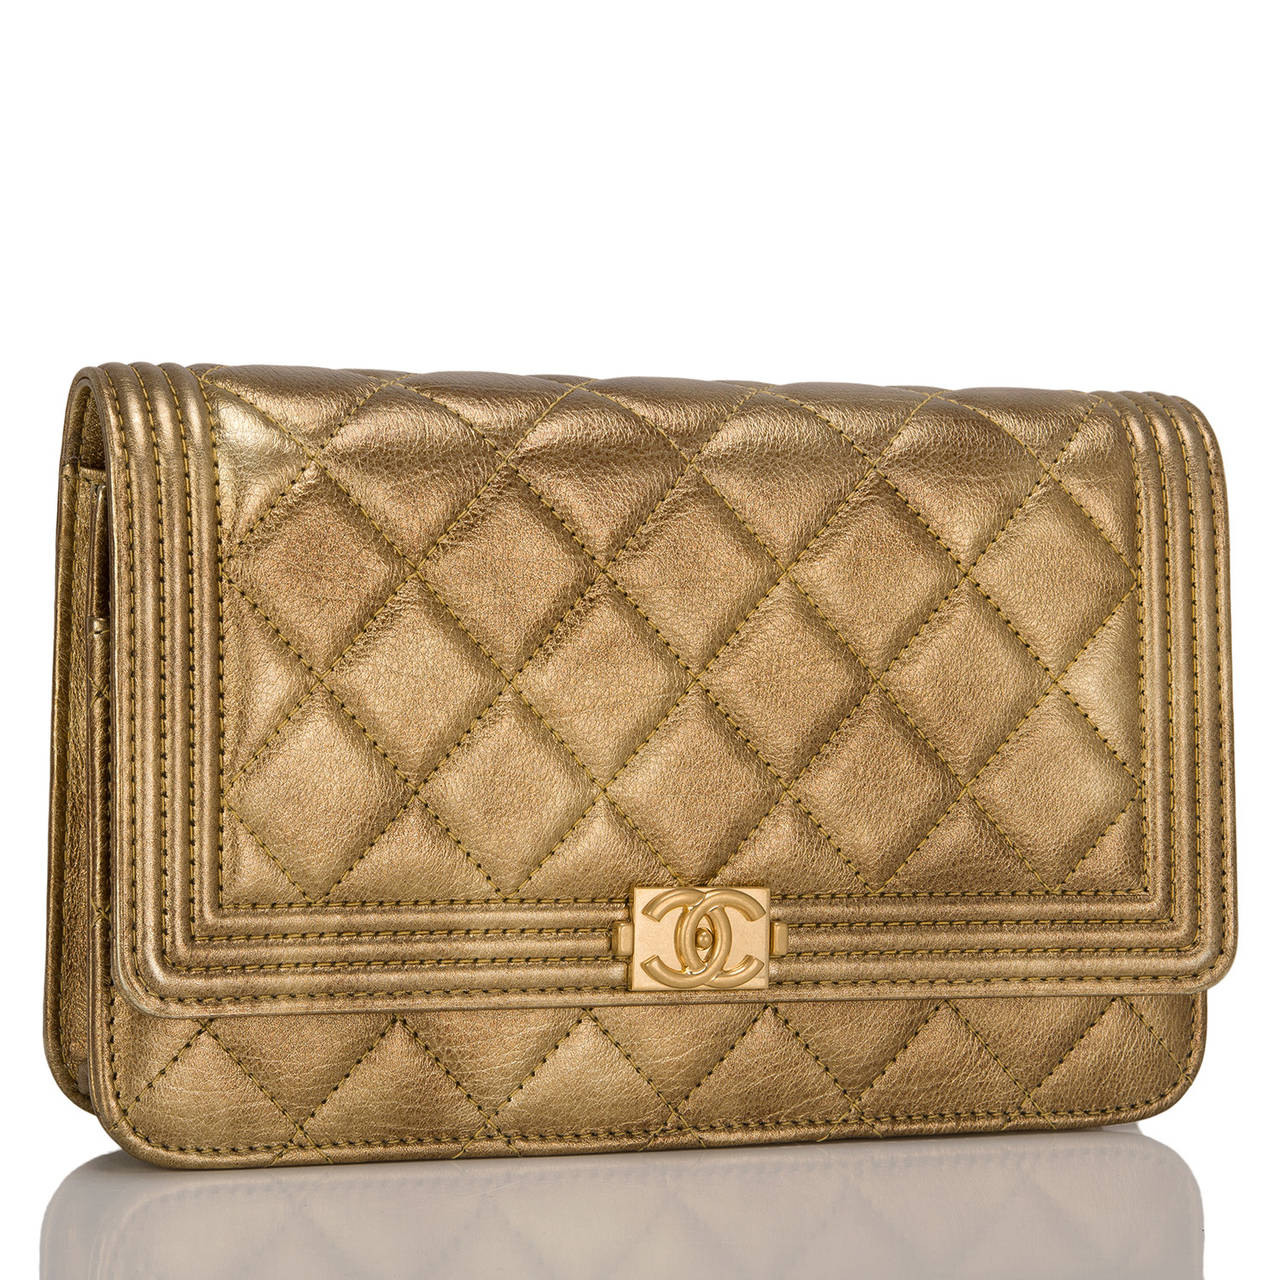 This gorgeous Gold Chanel Quilted Le Boy Wallet on Chain of distressed calfskin with aged gold tone hardware features a front flap with the signature Le Boy CC charm and hidden snap closure and gold tone metal chain link and gold leather